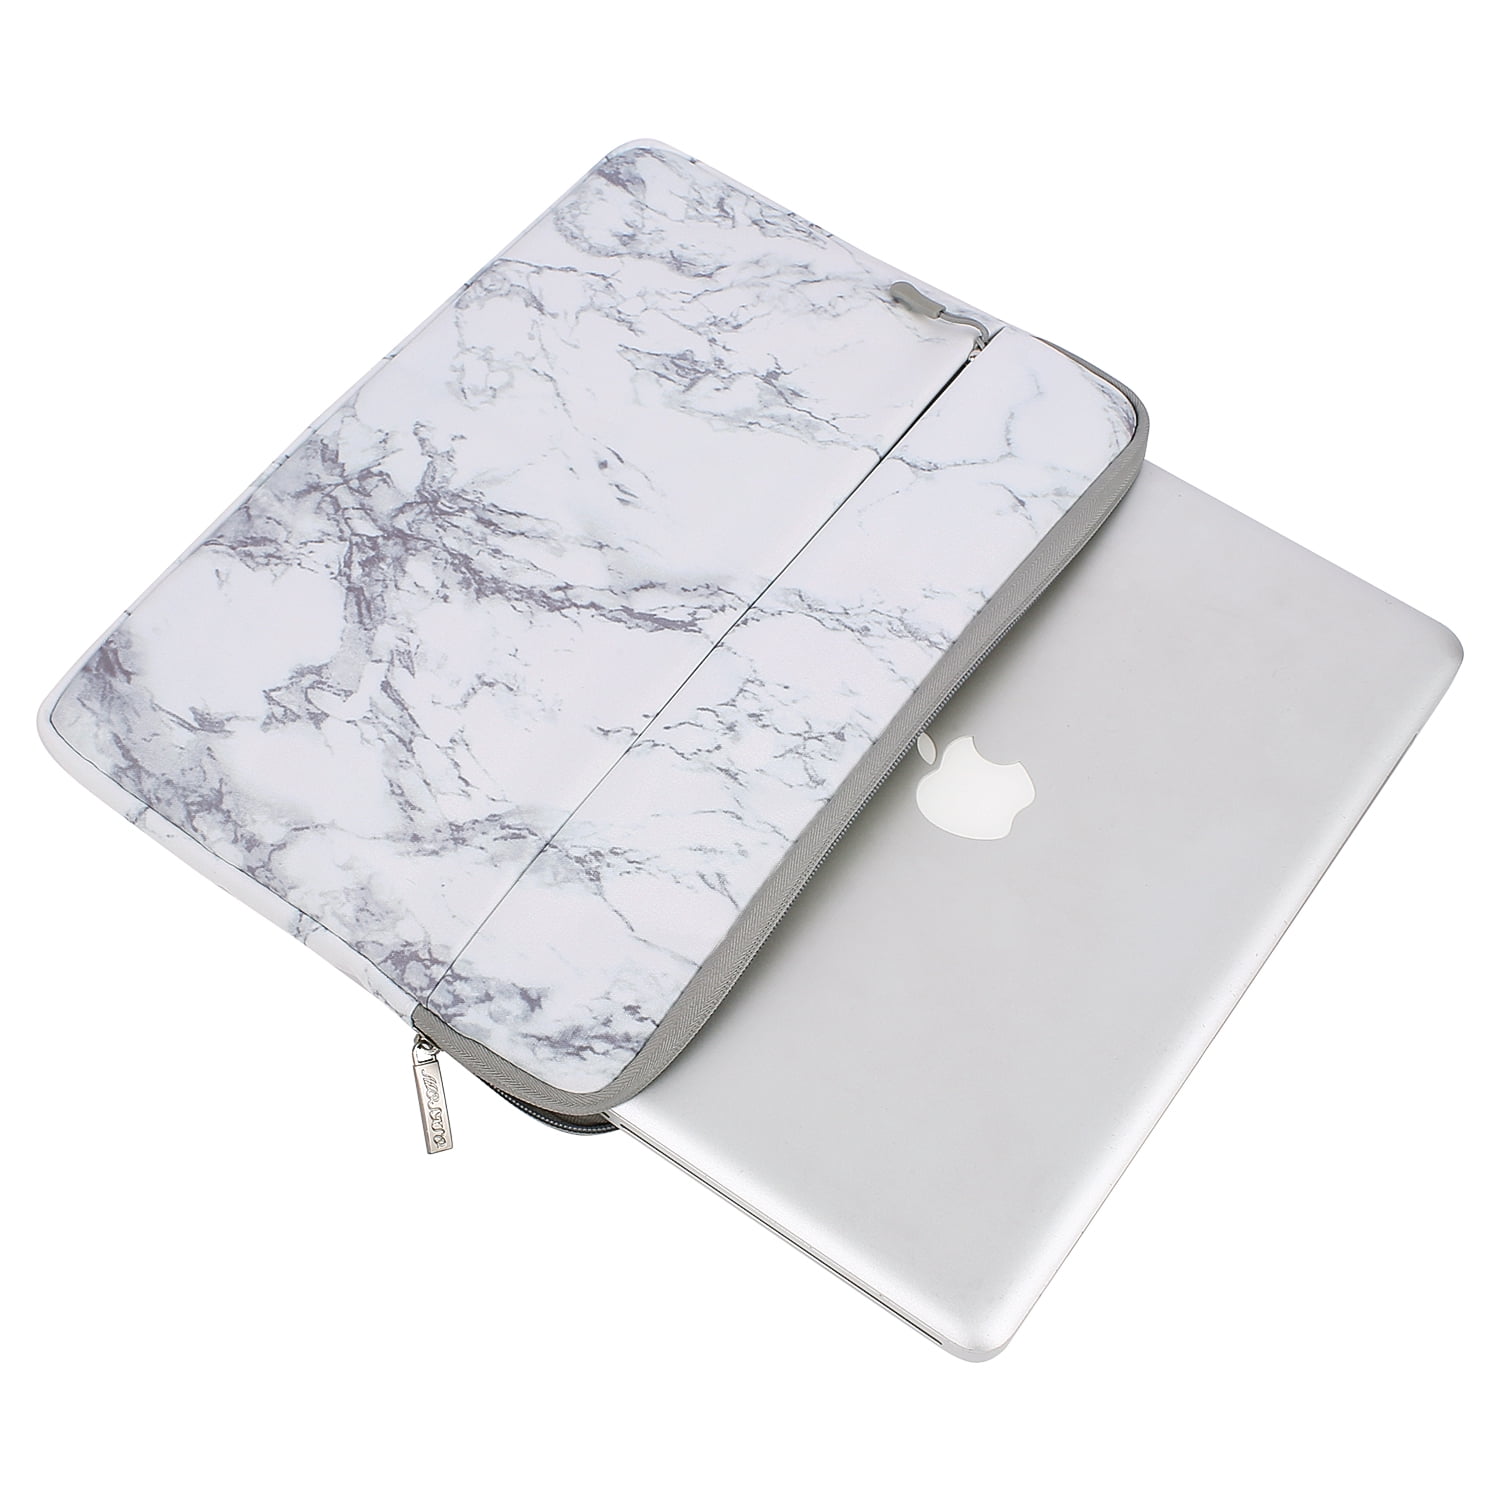 Mosiso Laptop Sleeve Bag 15-15.6 Inch MacBook Pro Ultrabook Notebook Canvas Marble Pattern Protective Tablet Carrying Case Cover - Walmart.com